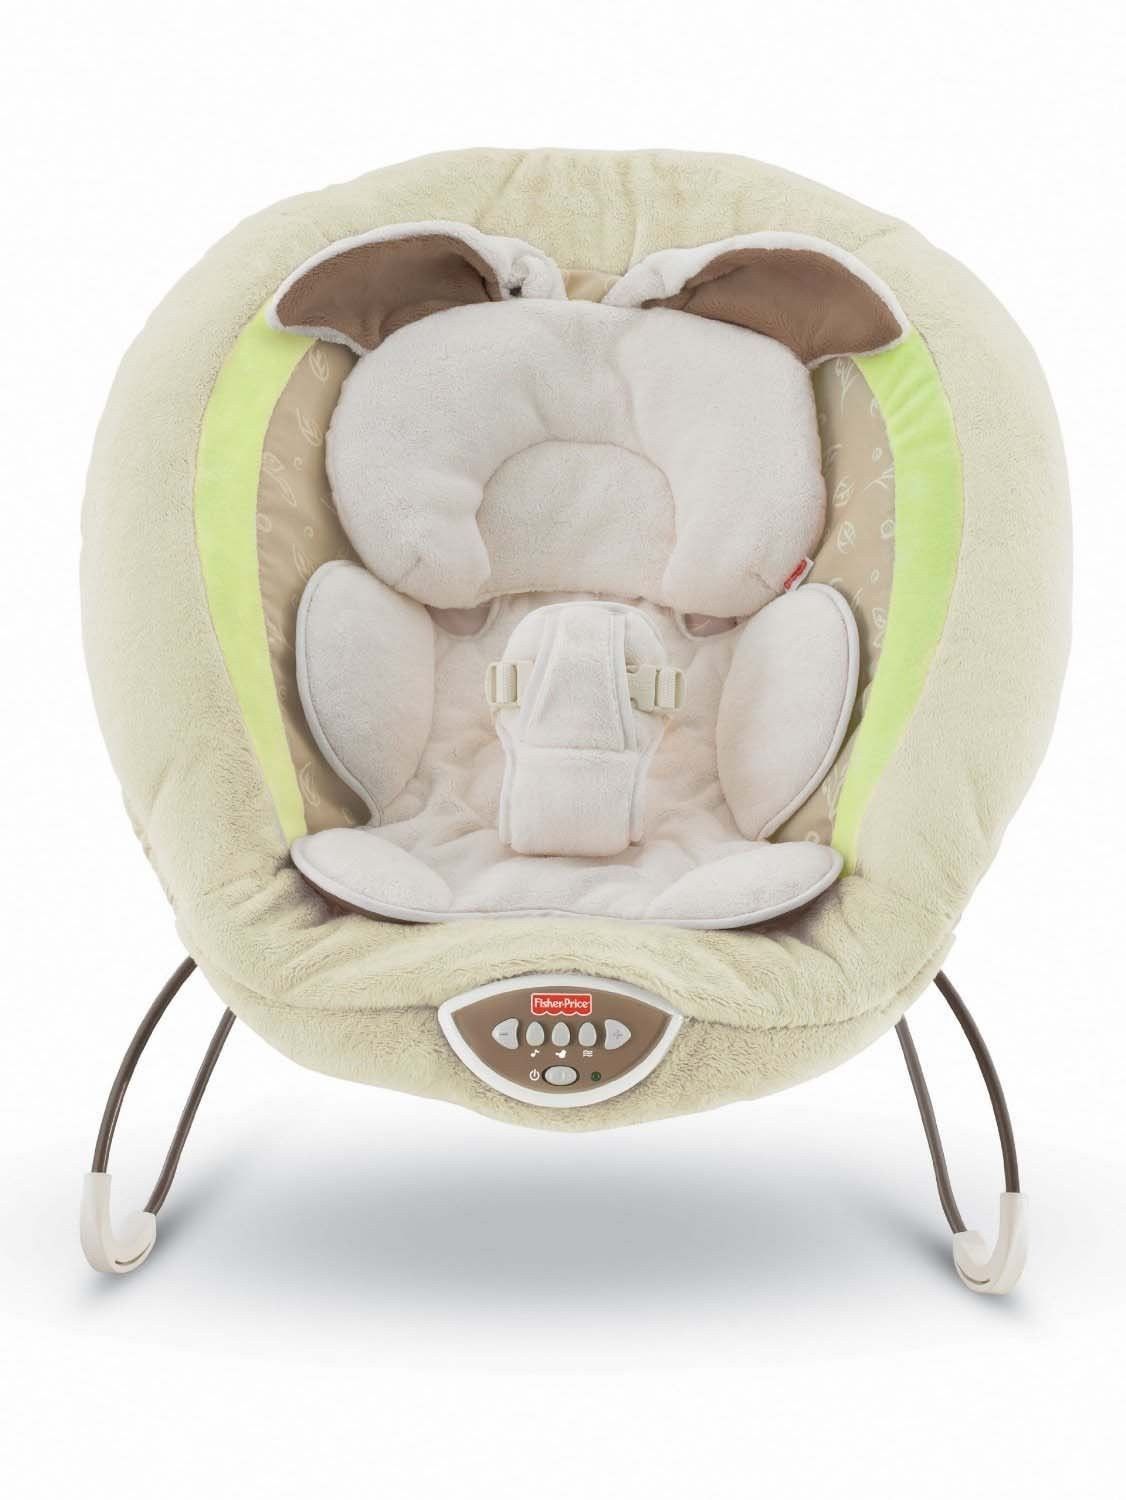 fisher price bouncer seat